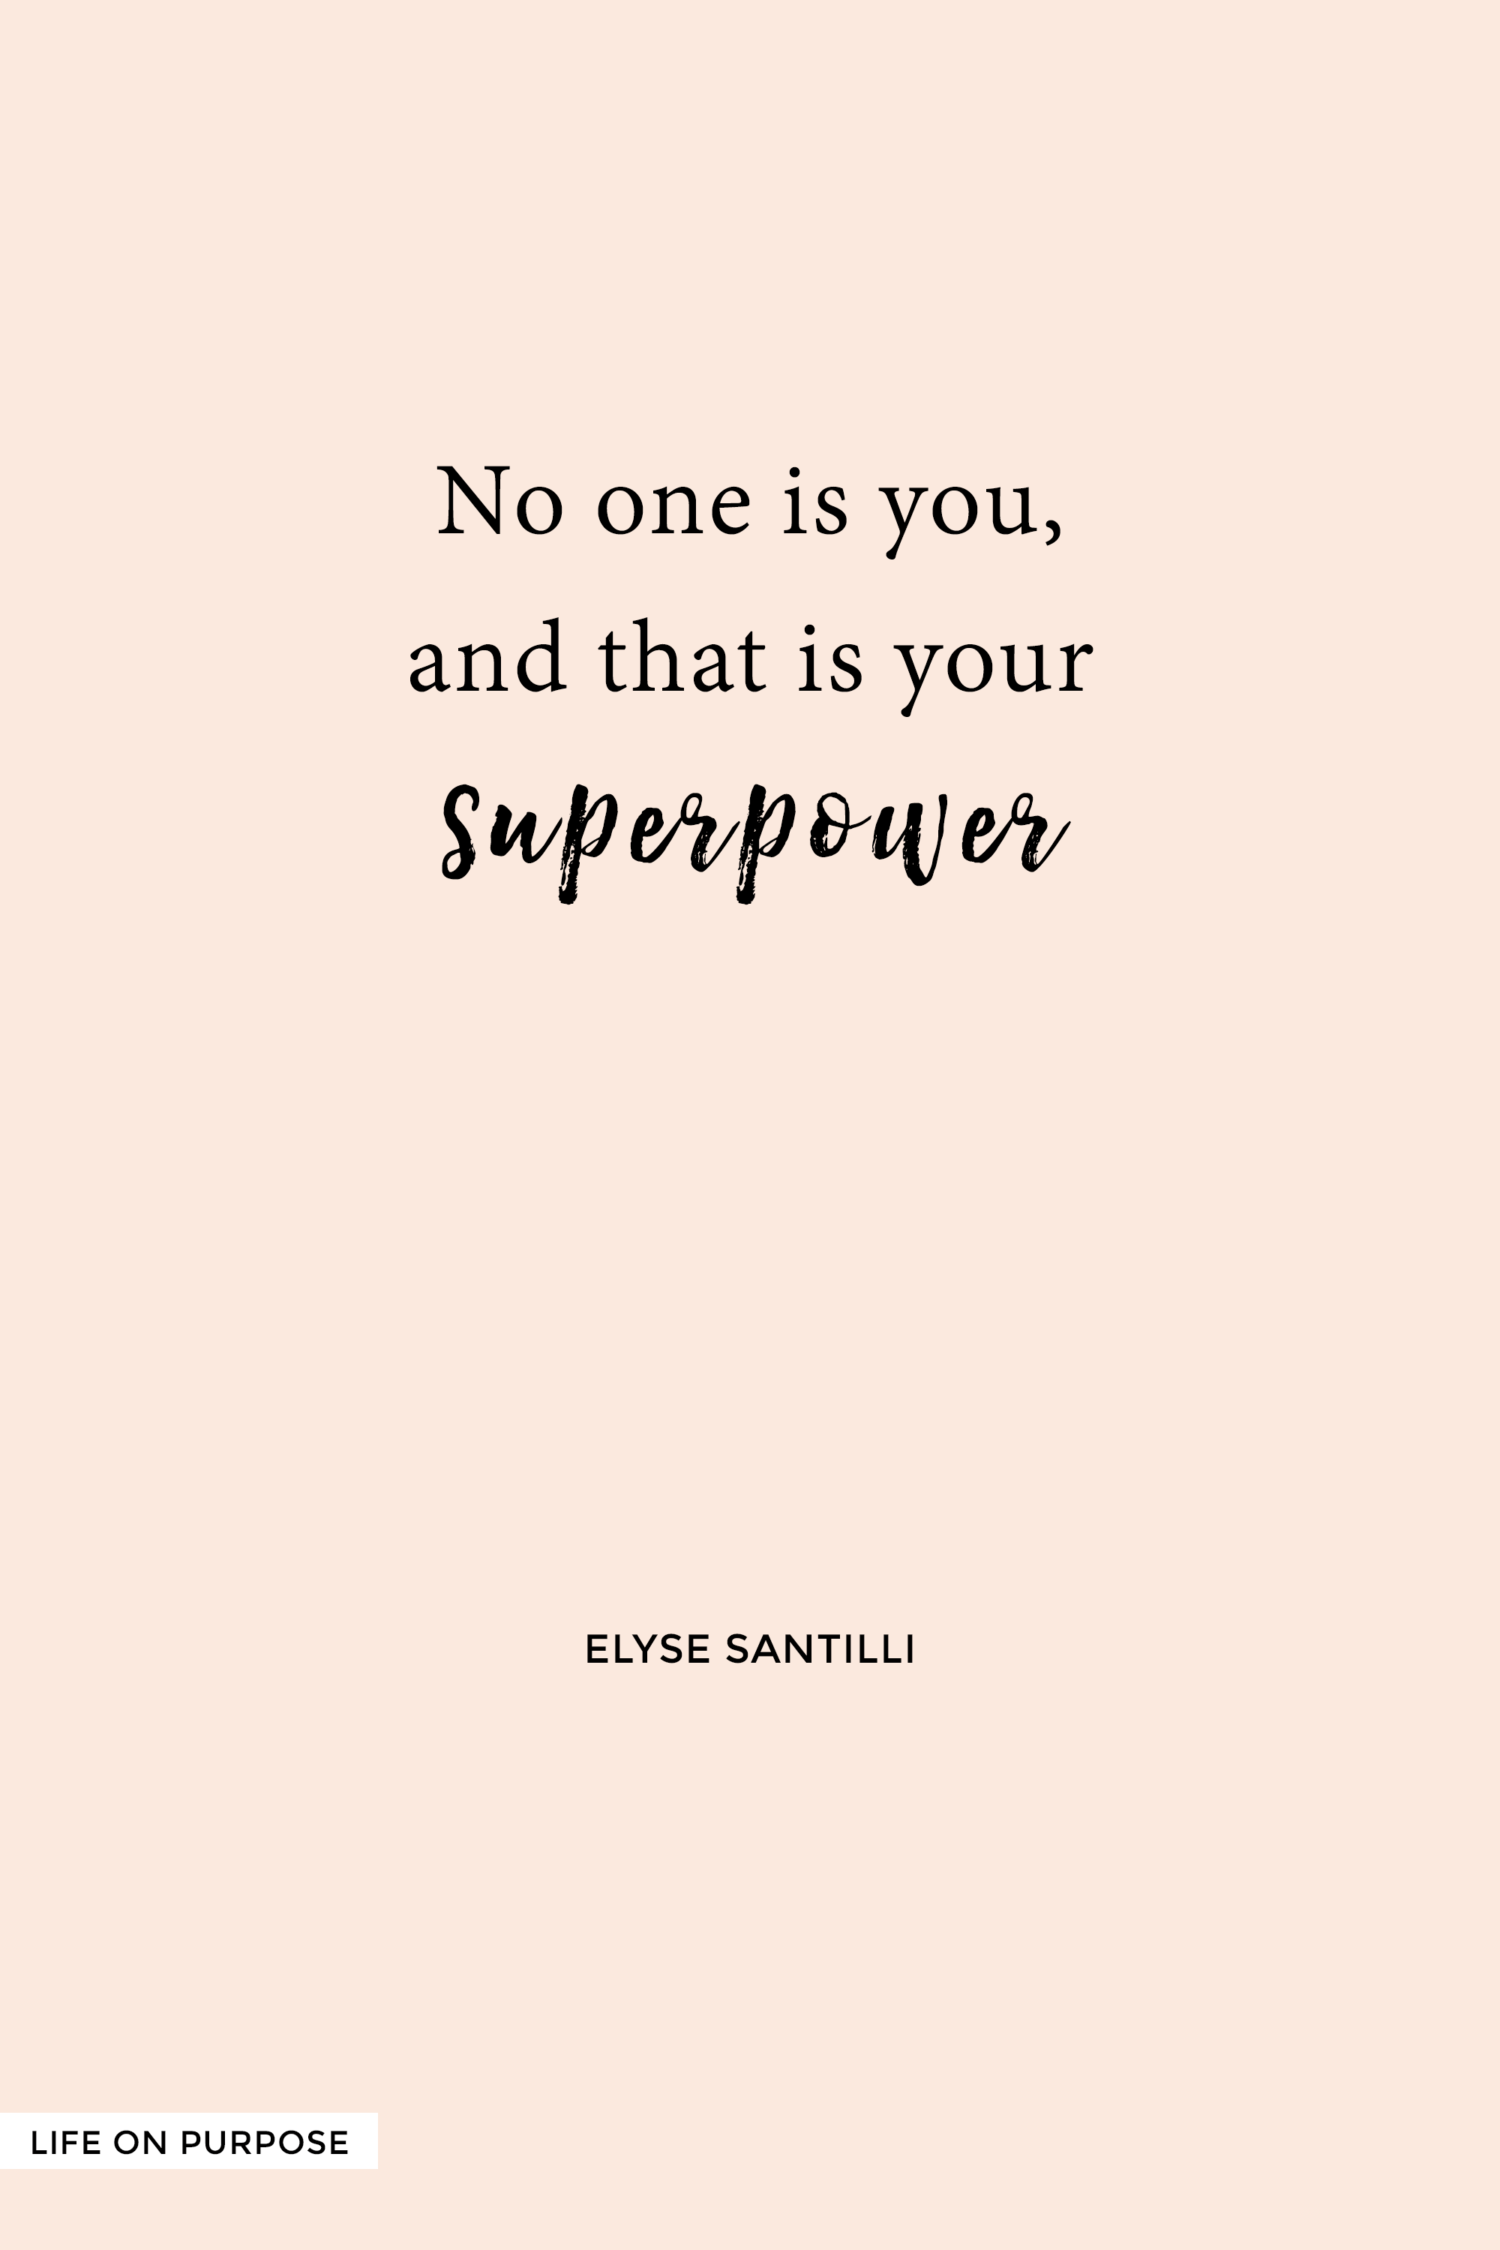 https://ericalayne.co/wp-content/uploads/2017/08/No-one-is-you-that-is-your-superpower-e1502325651879.png